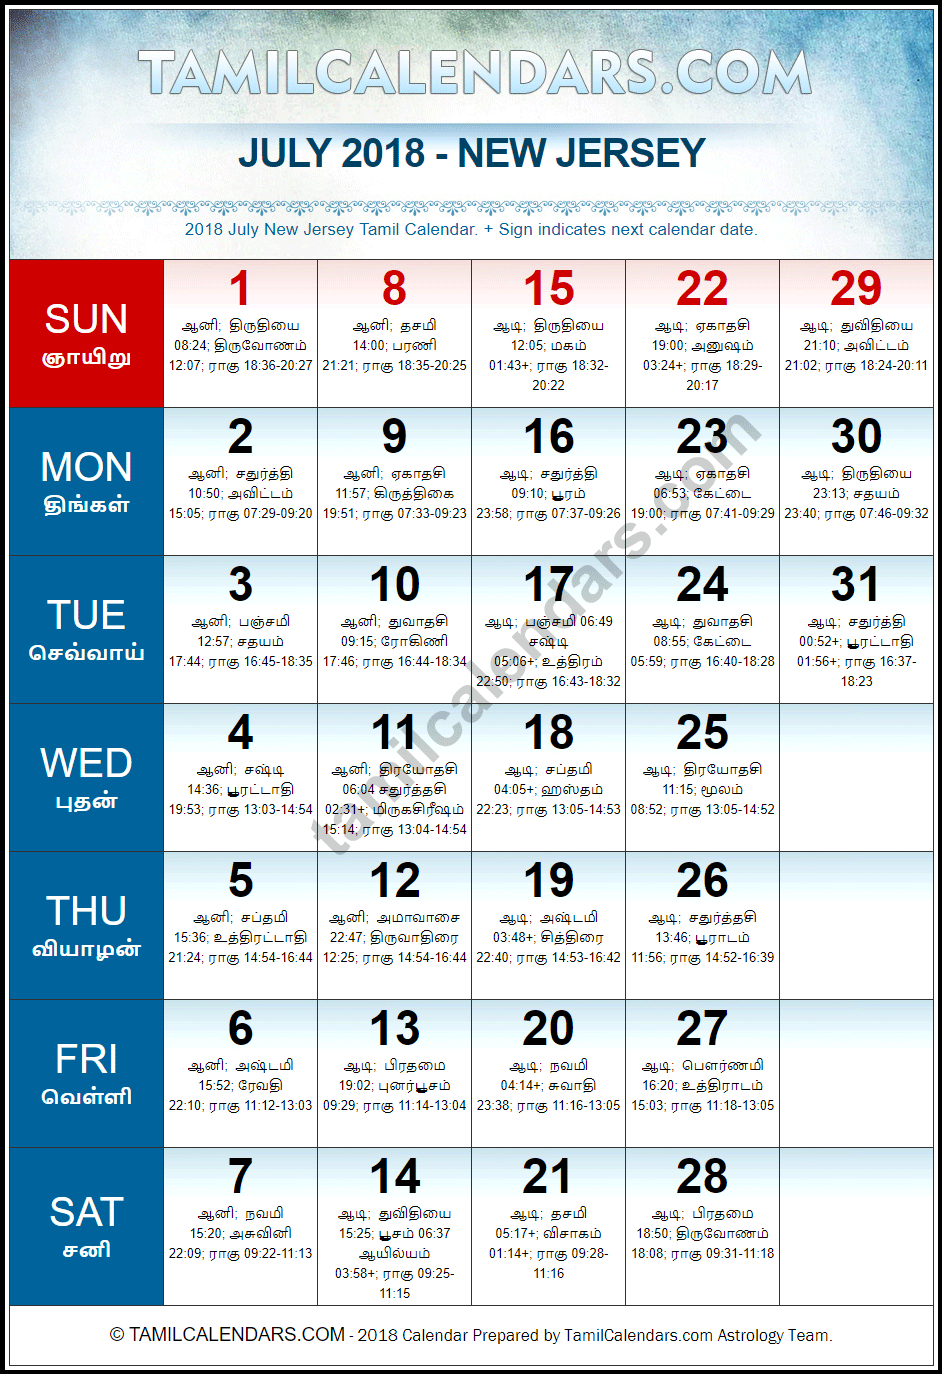 July 2018 Tamil Calendar for New Jersey, USA